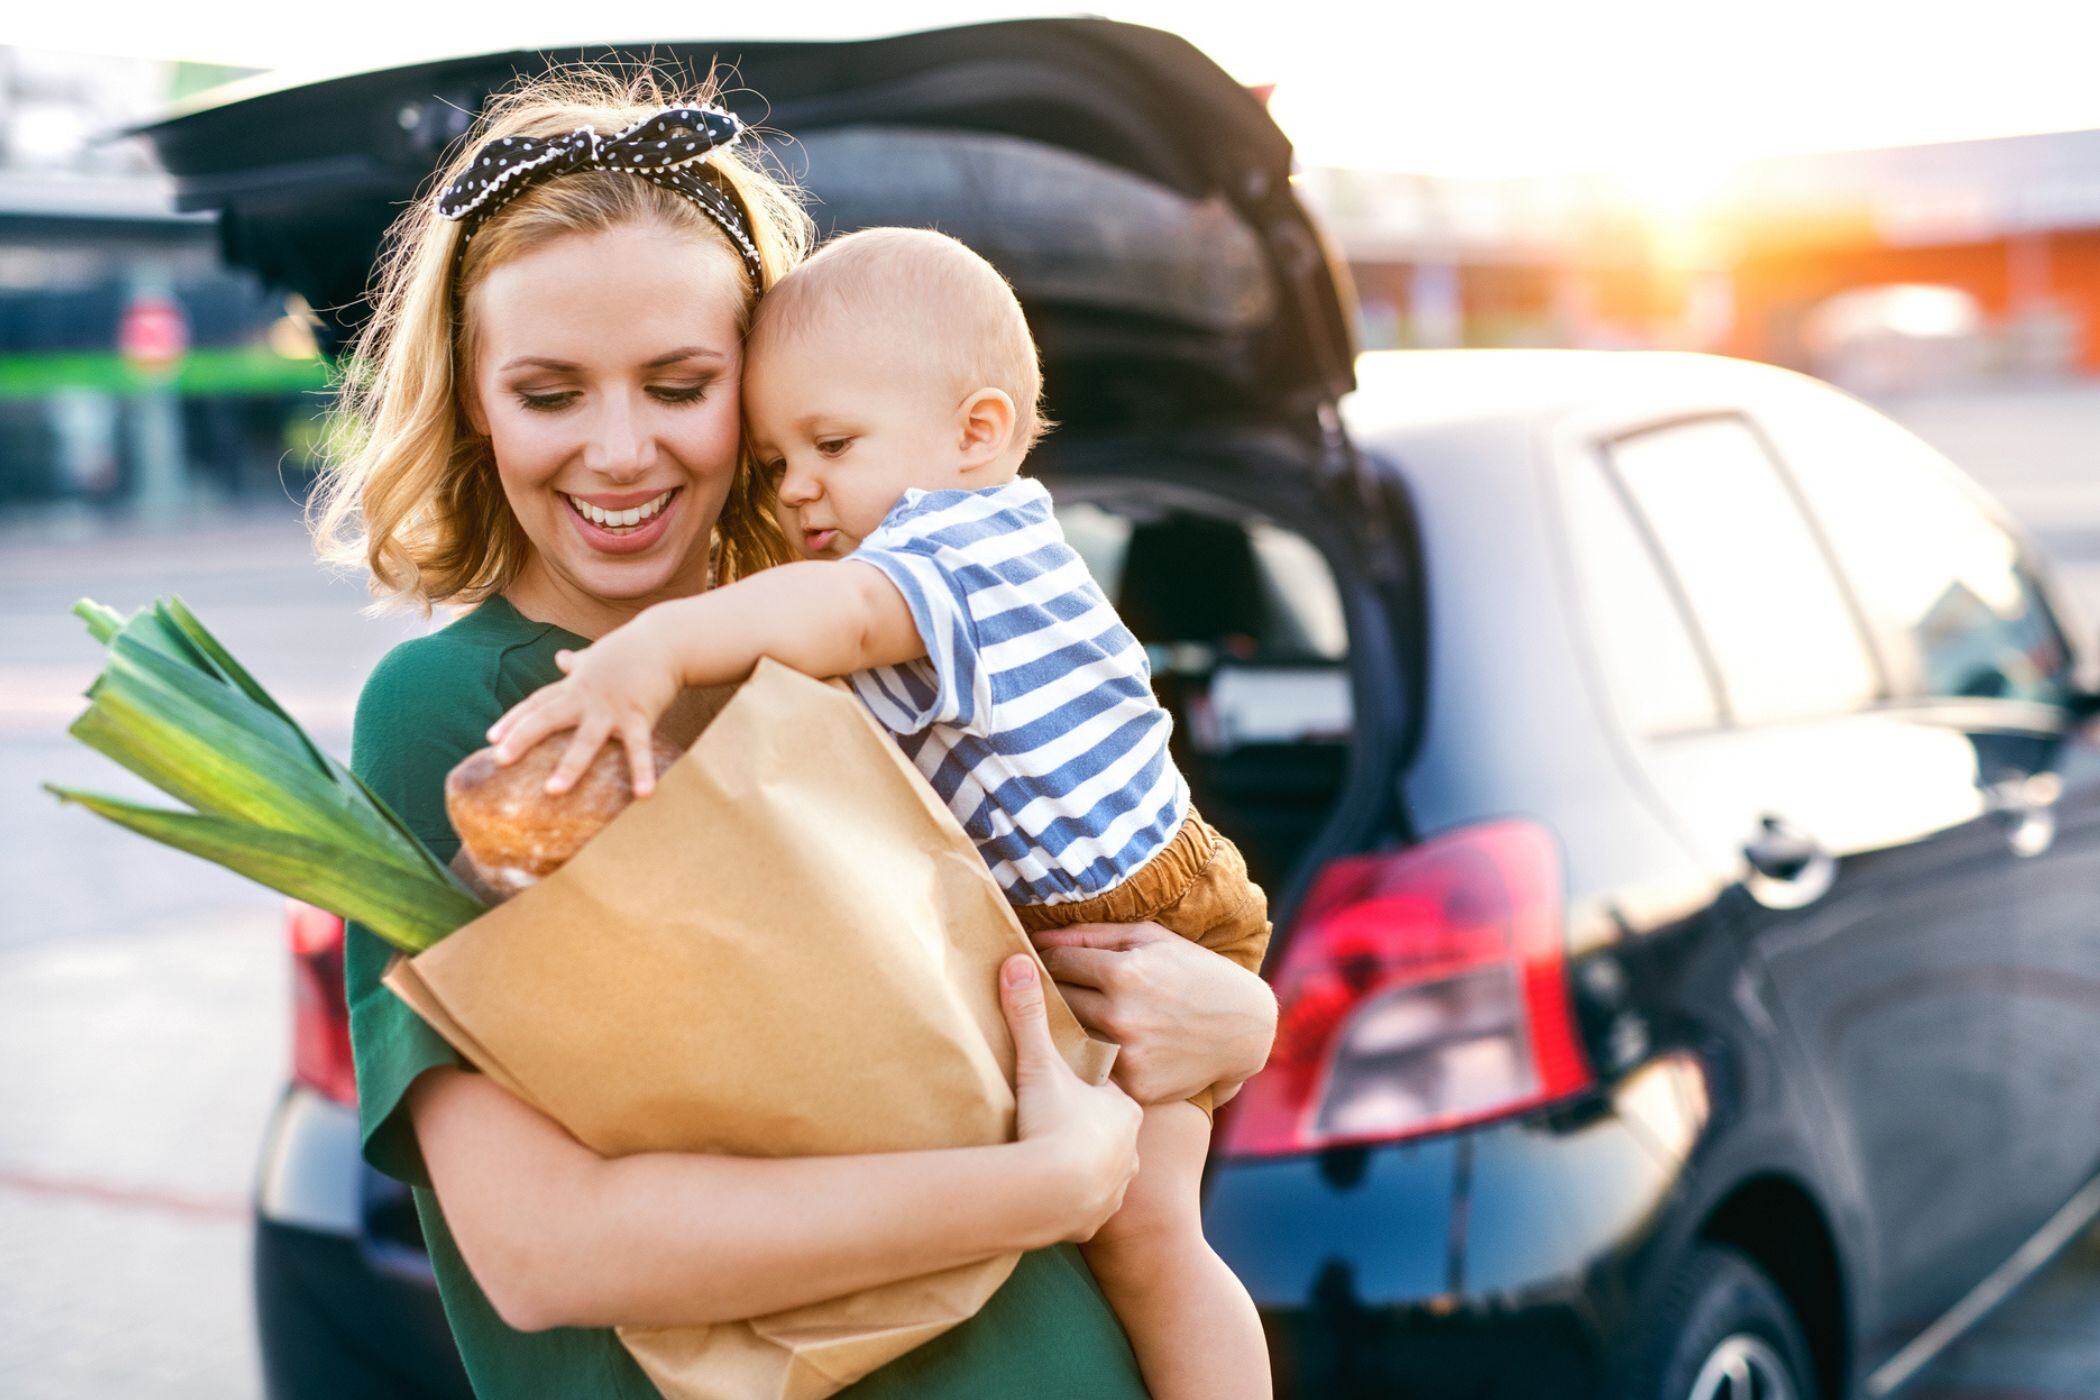 woman in grocery store parking lot holding baby and bag of gifted groceries